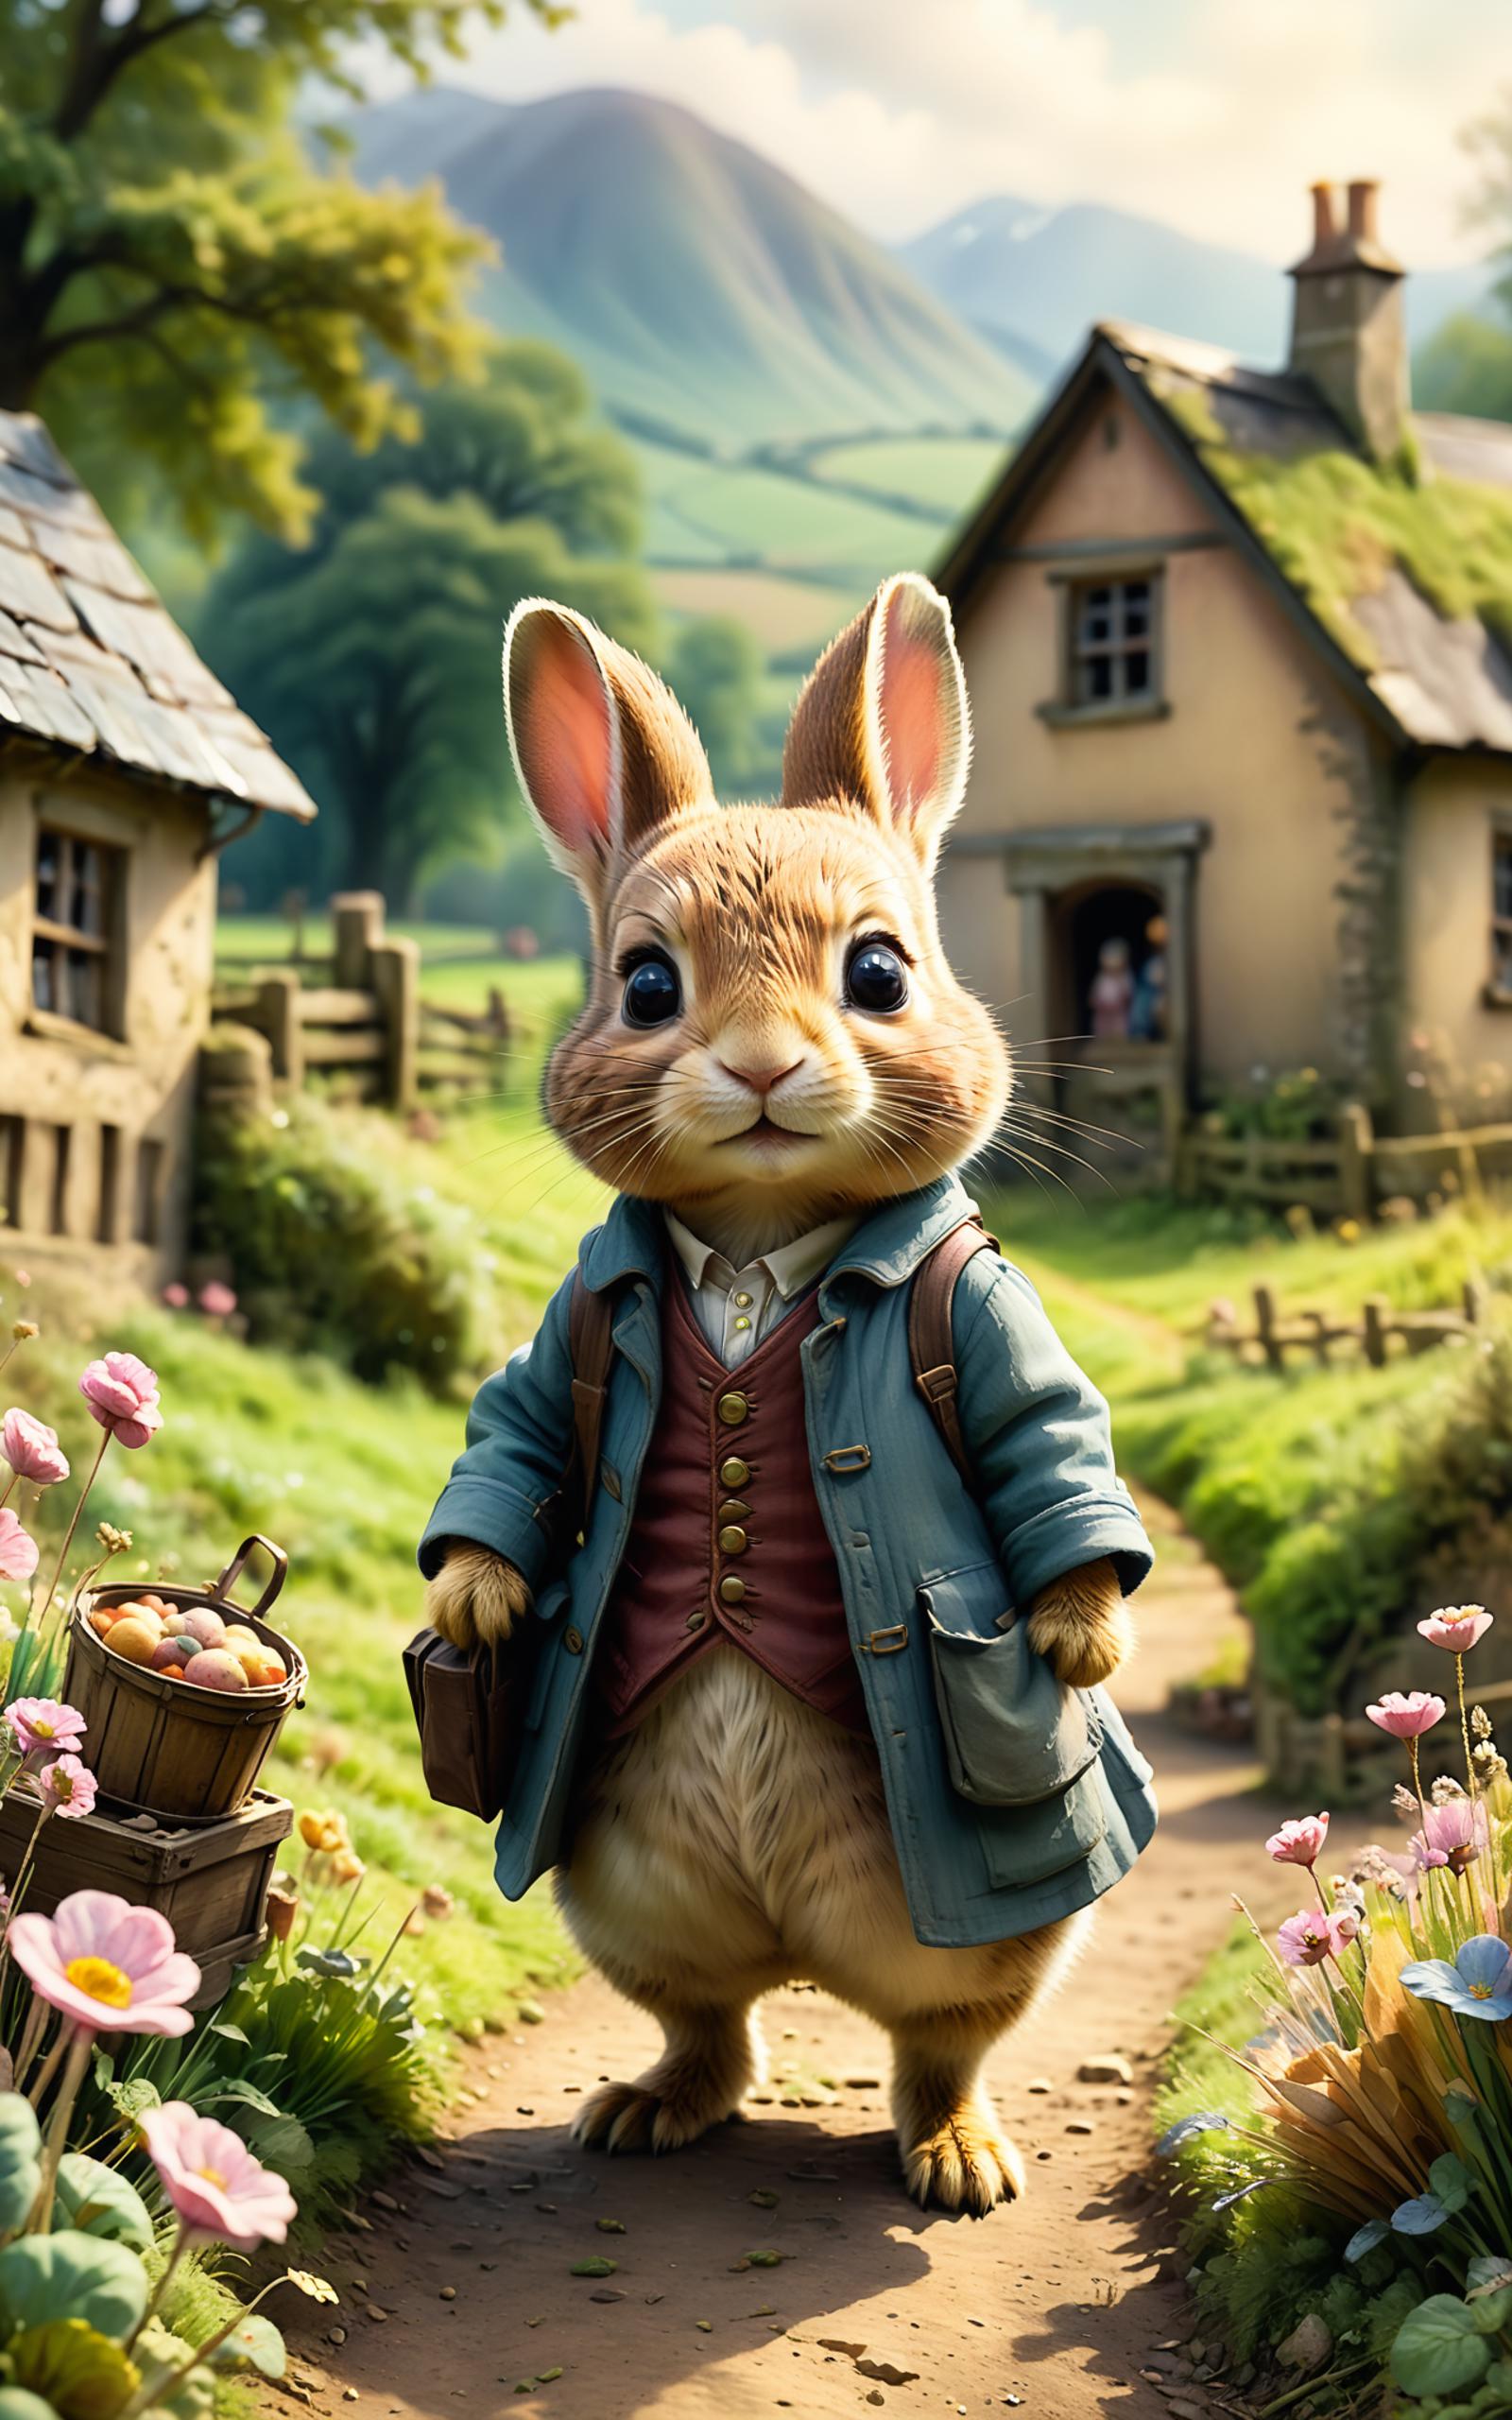 A cartoon bunny character wearing a jacket and holding a briefcase.